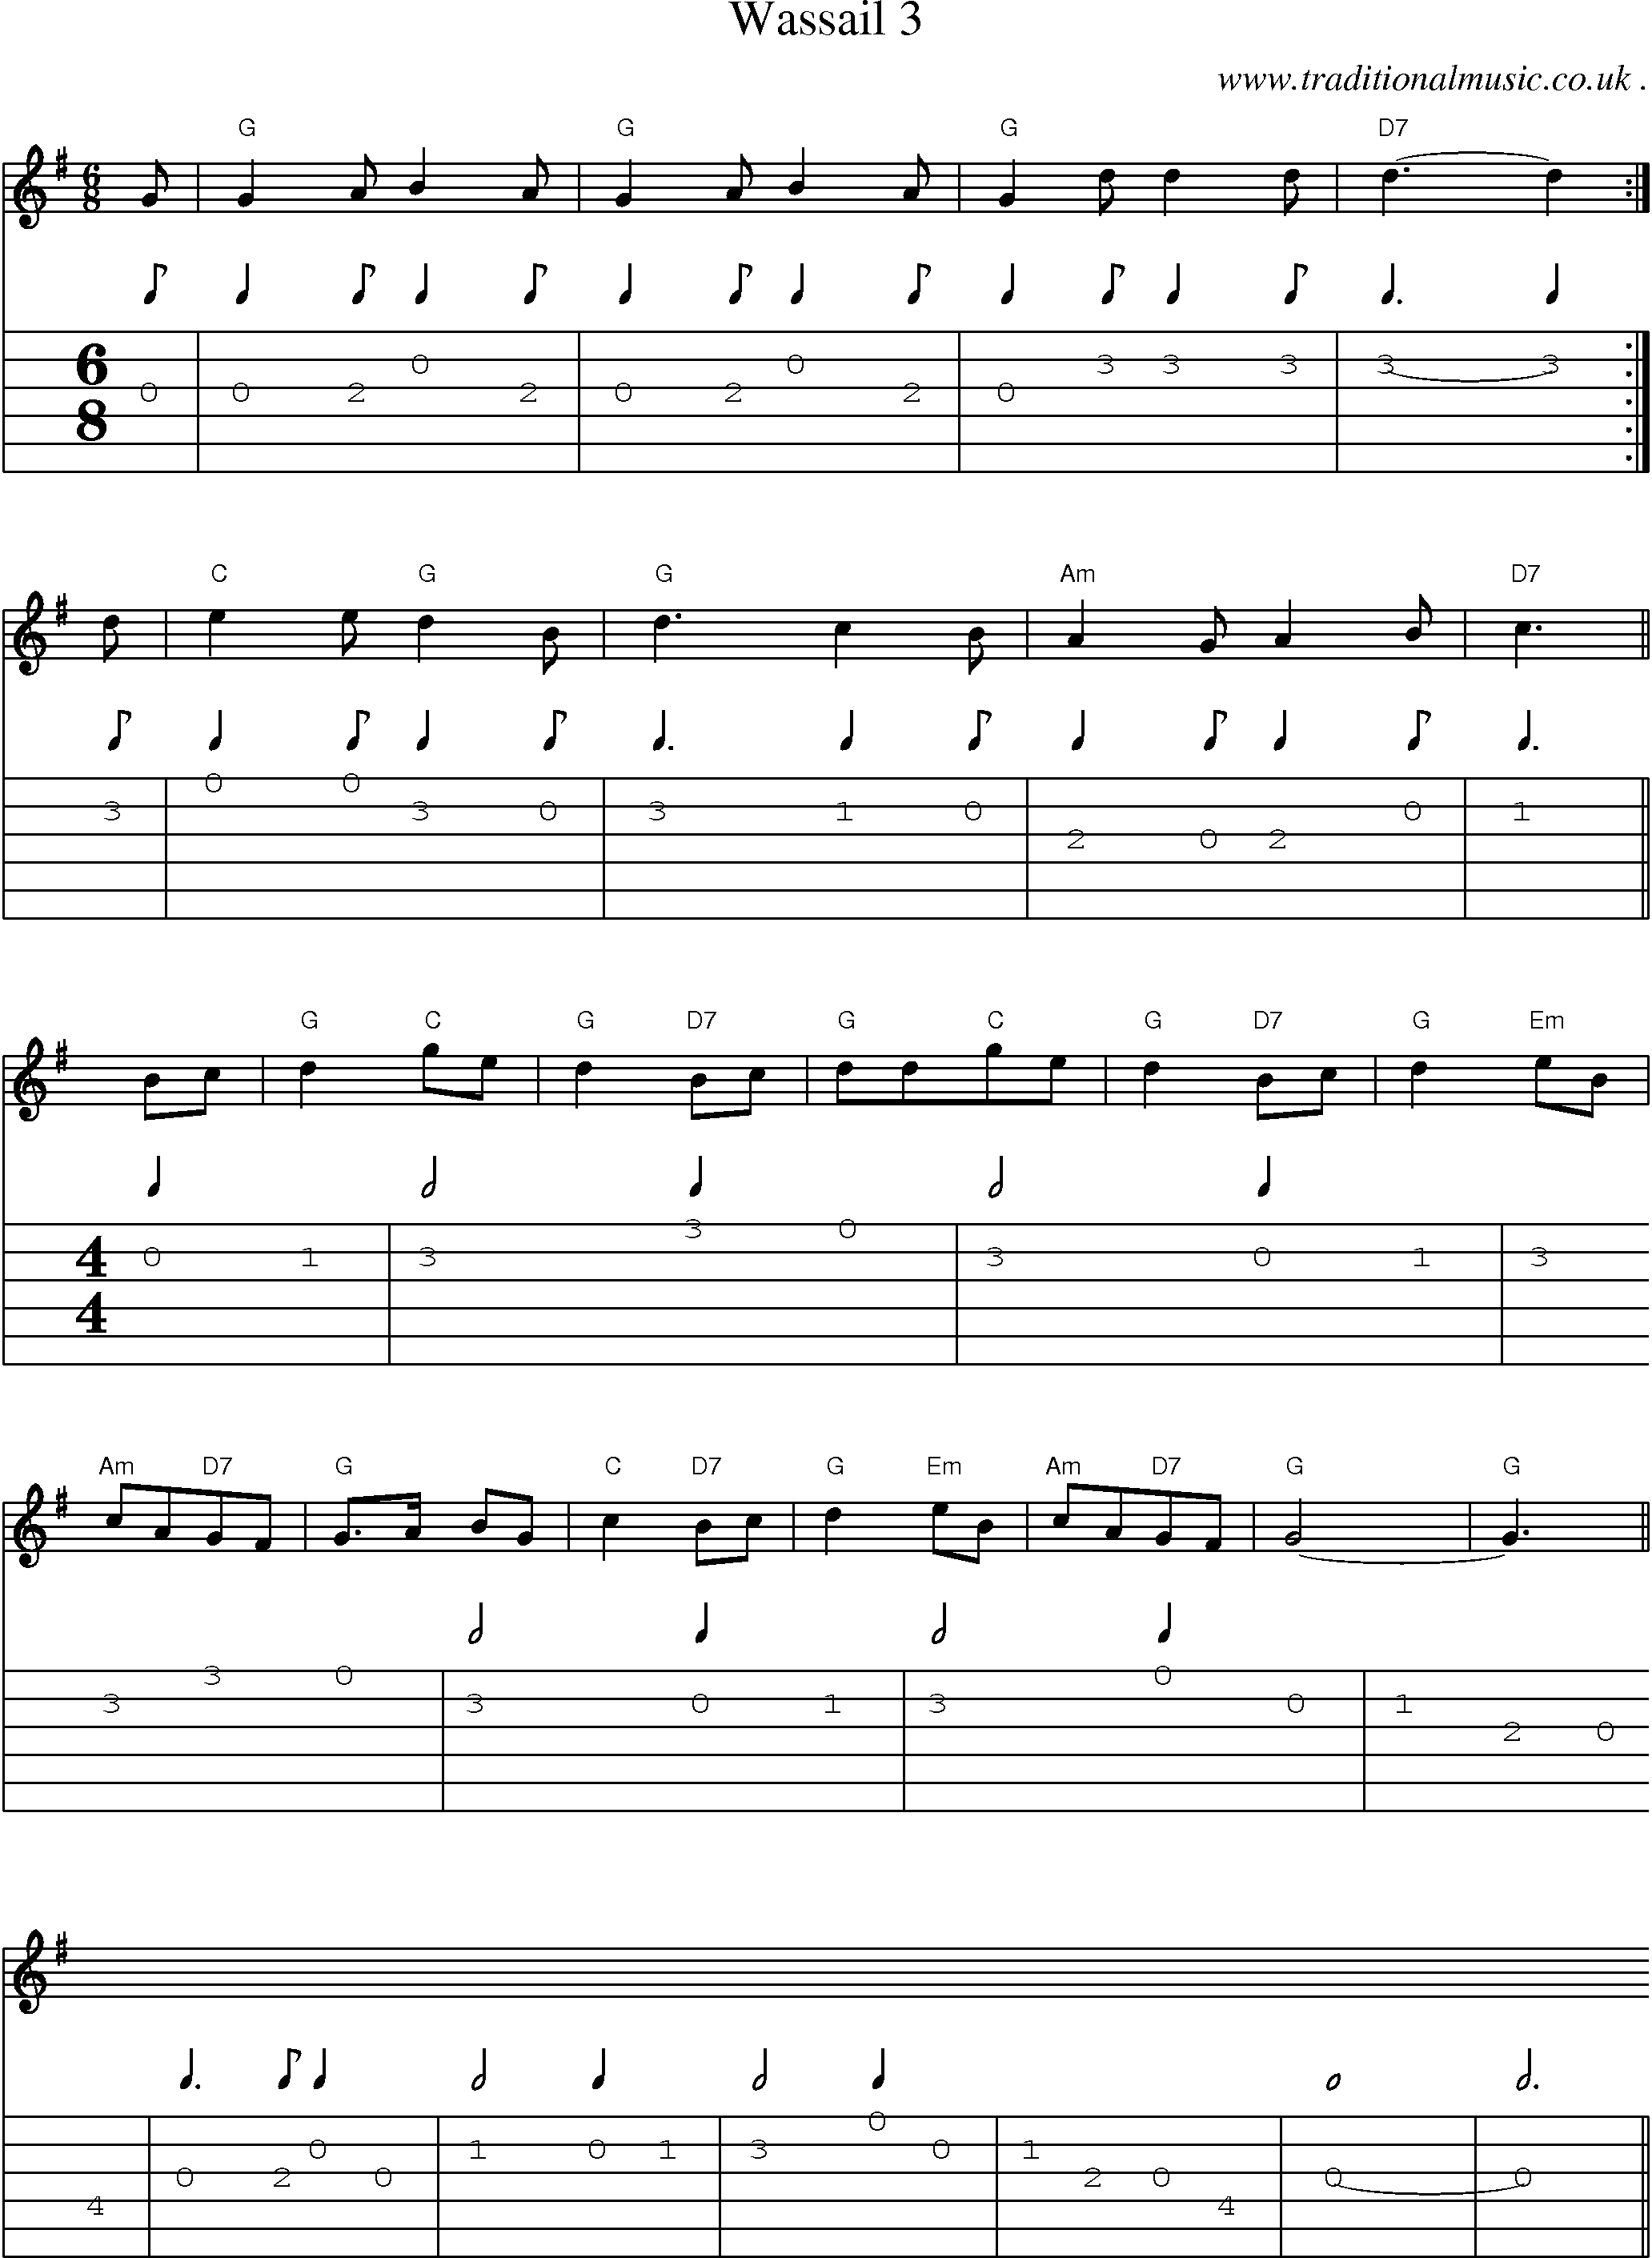 Sheet-Music and Guitar Tabs for Wassail 3